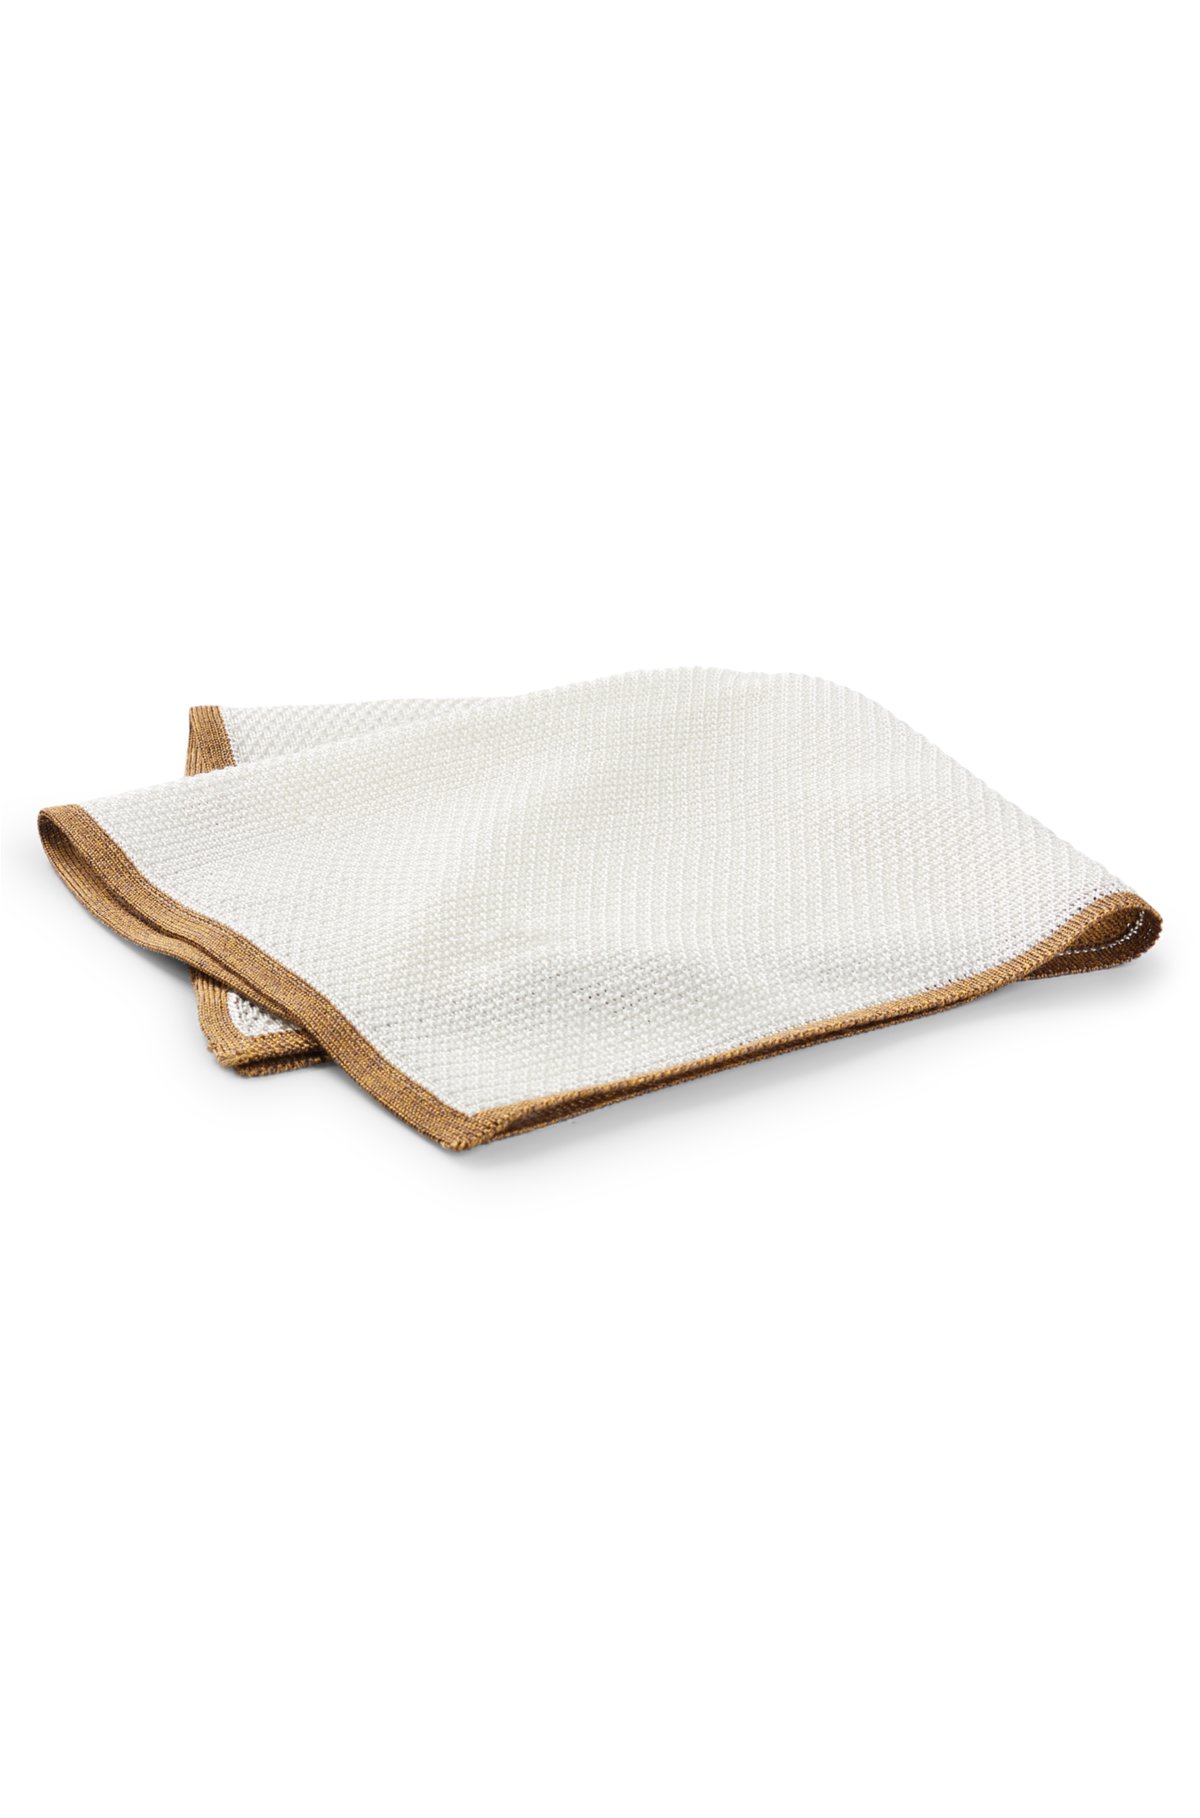 Piqué-woven pocket square in pure silk, Light Yellow